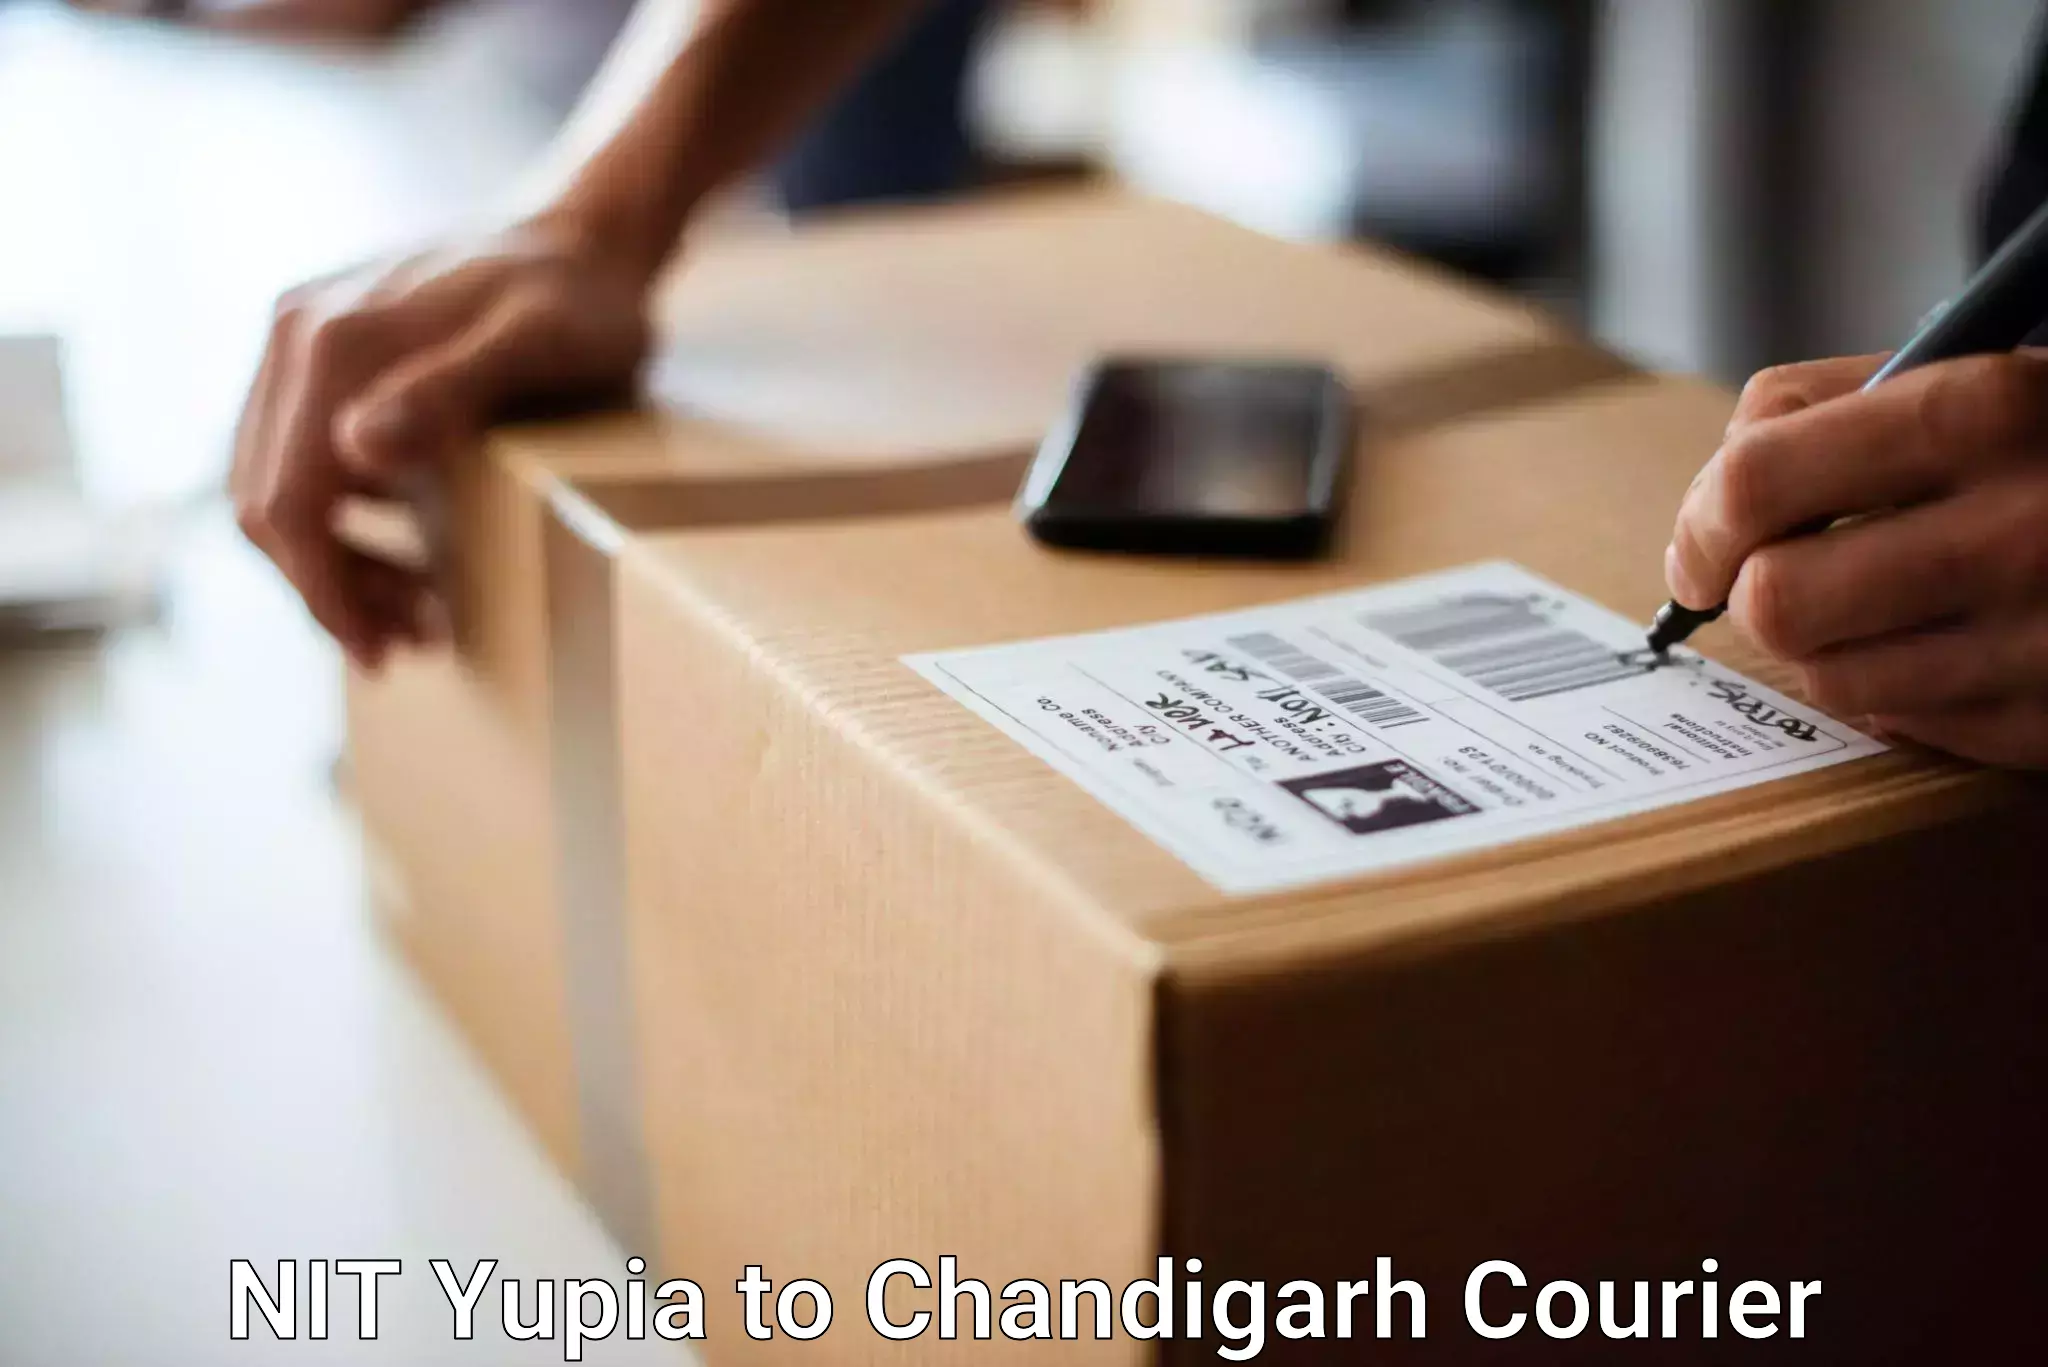 Hassle-free luggage shipping in NIT Yupia to Chandigarh